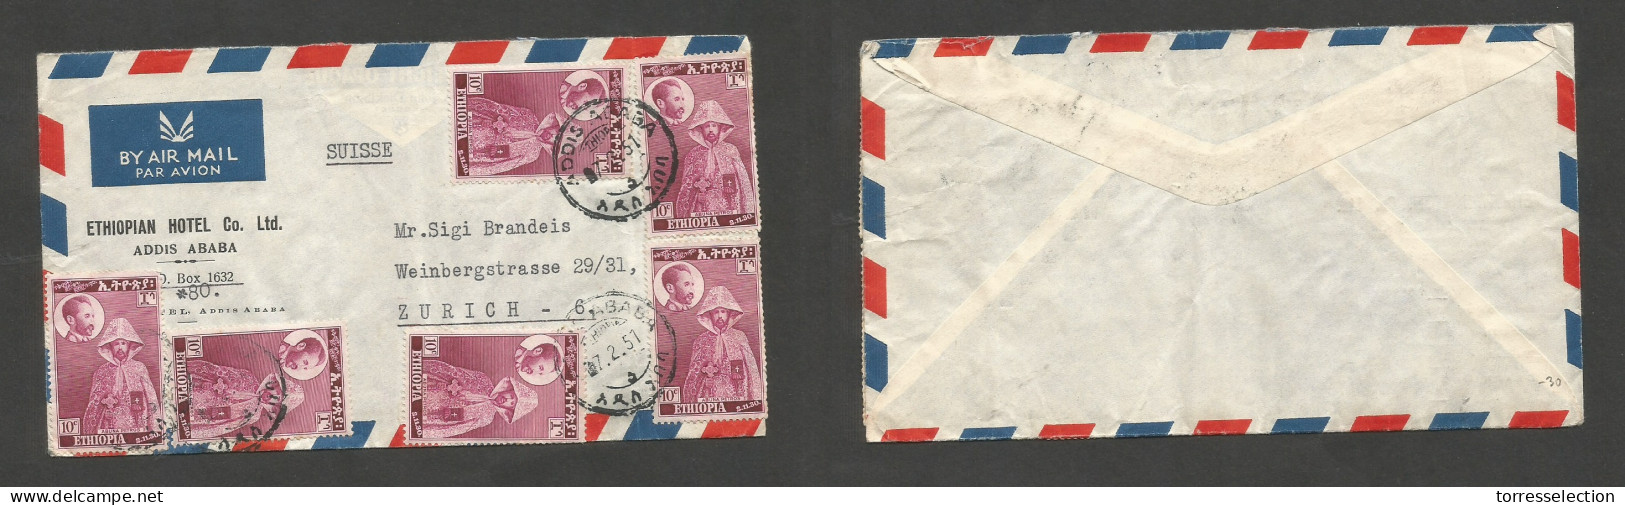 ETHIOPIA. 1951 (7 Febr) Addis Ababa - Zurich, Switzerland. Air Multifkd Env, Tied Cds, At 60c Rate. V. Appealing. - Ethiopia